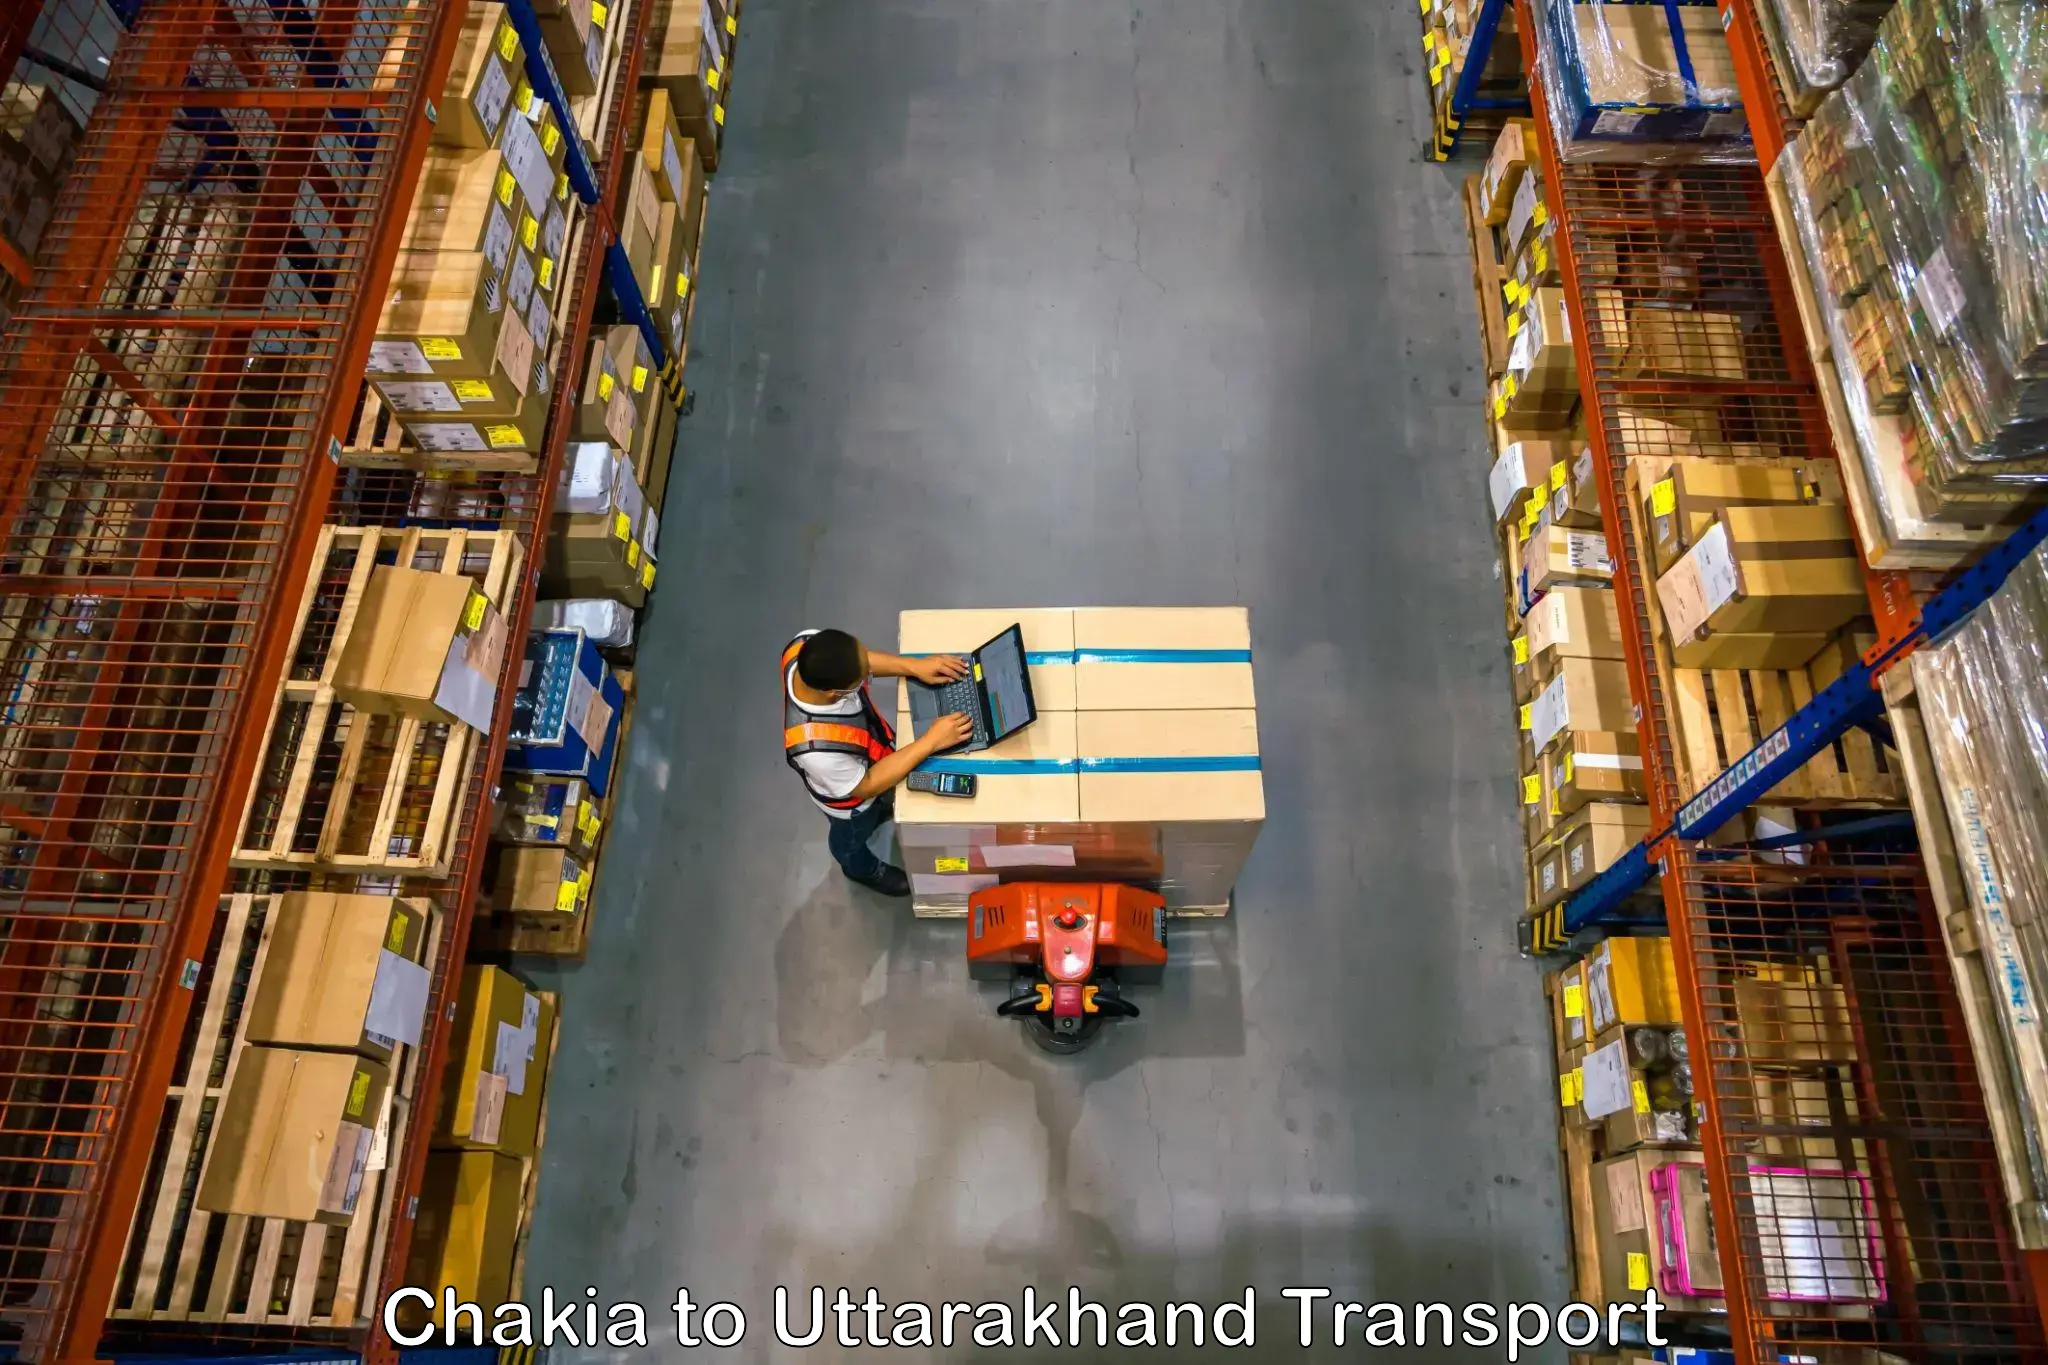 Truck transport companies in India Chakia to Paithani